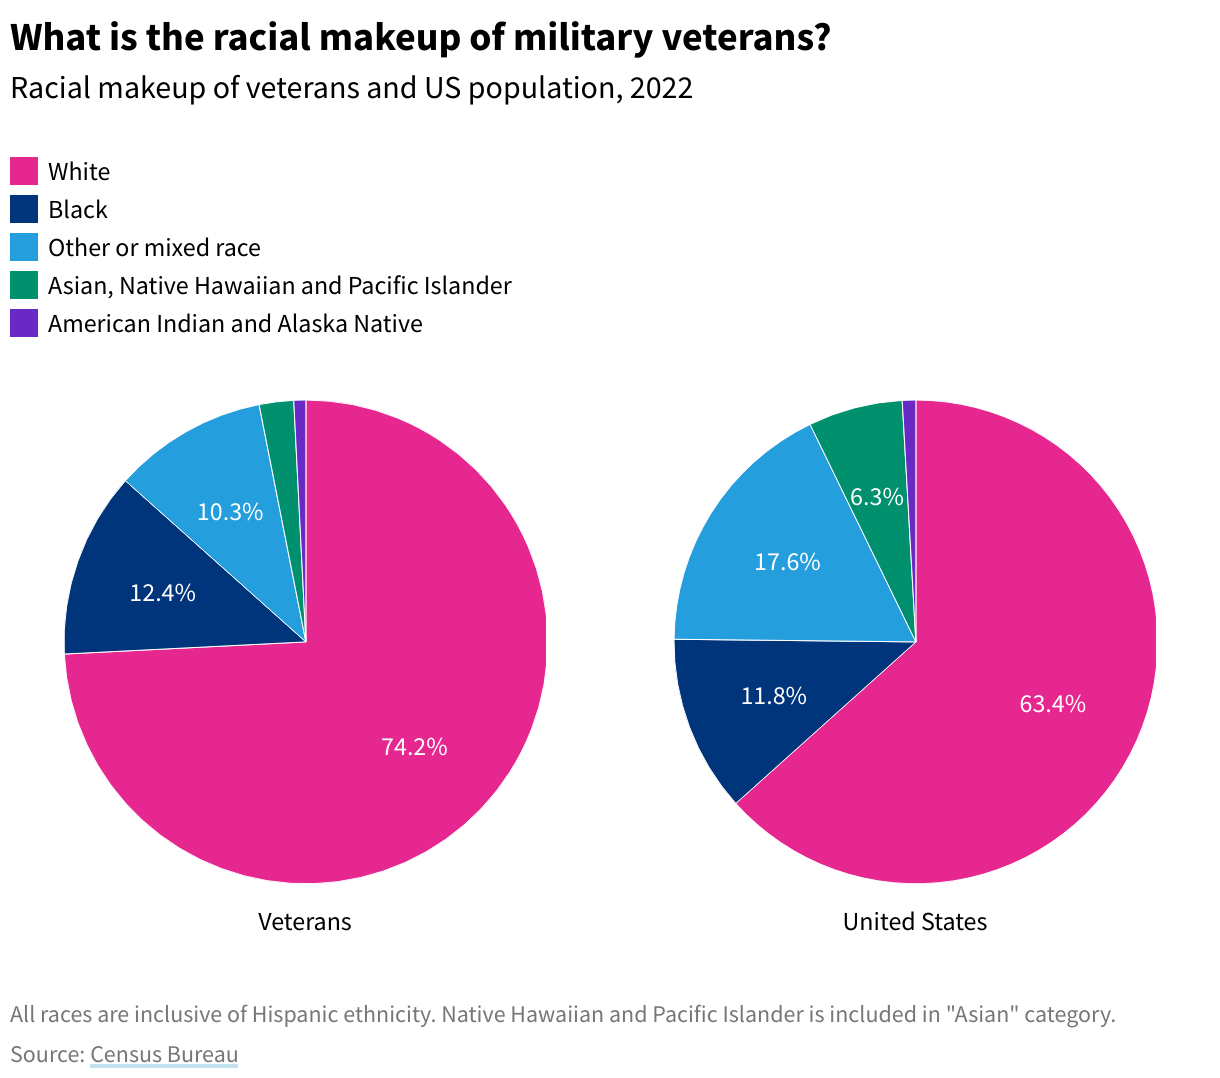 Two pie charts showing the racial makeup of veterans and the general US population in 2022.